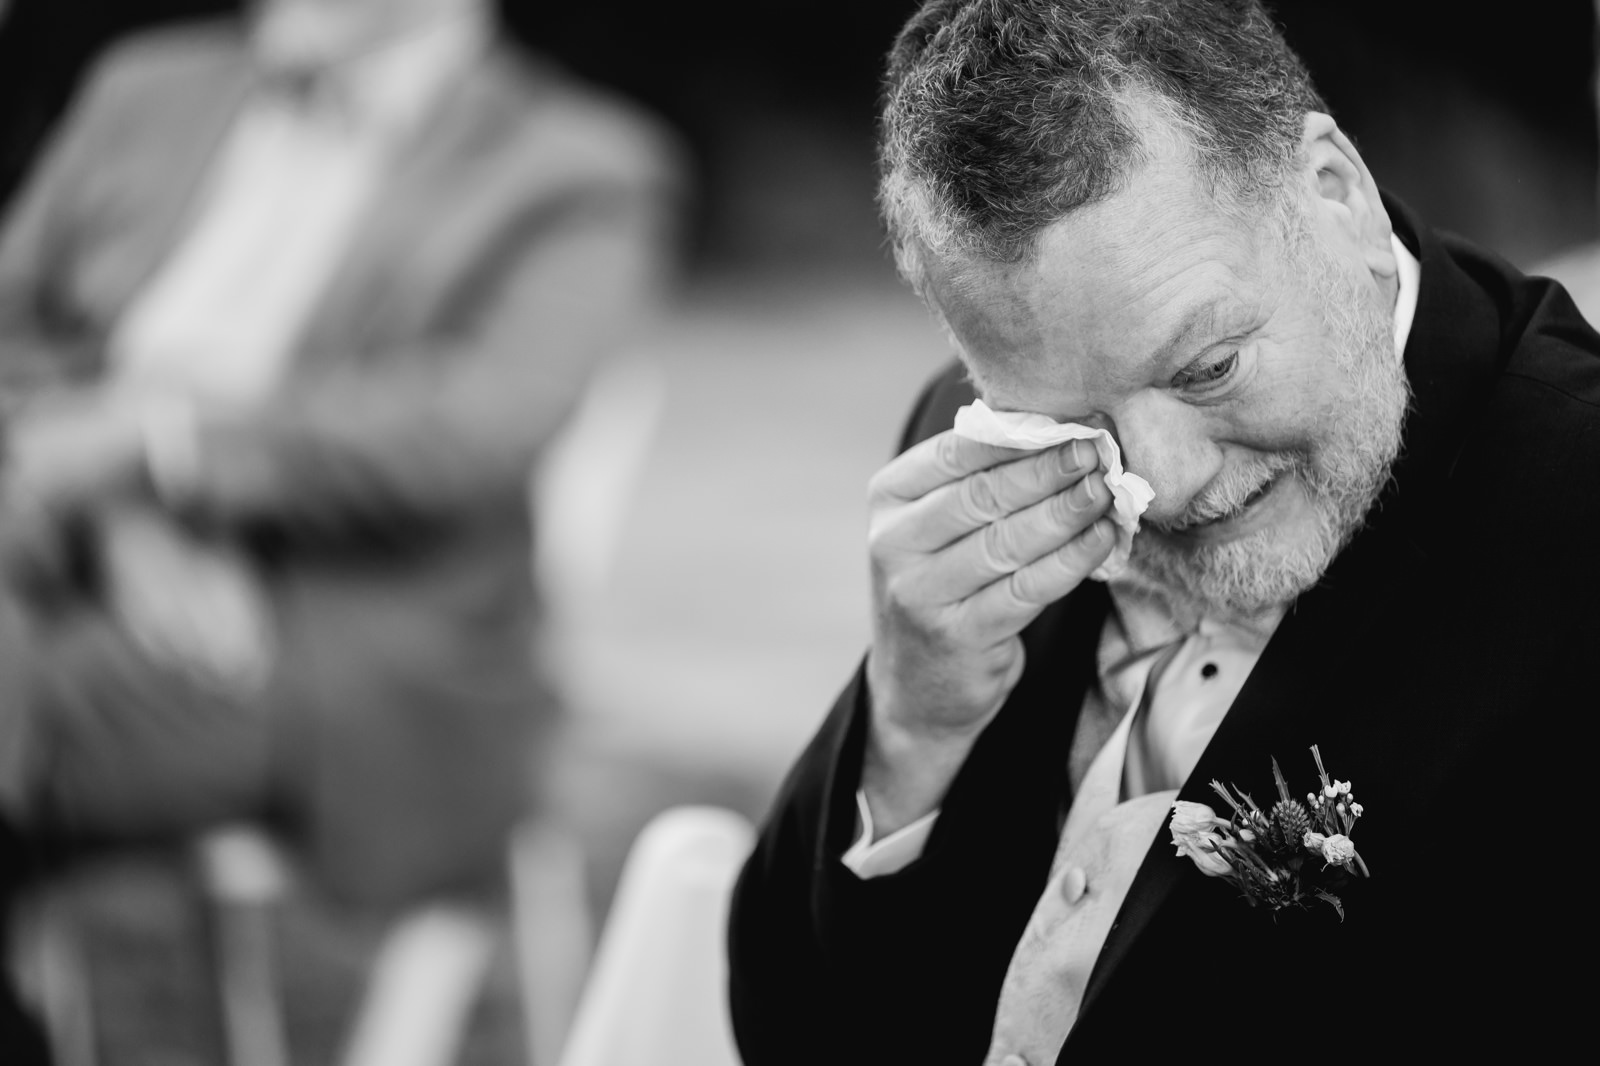 Father of the bride crying at the wedding ceremony